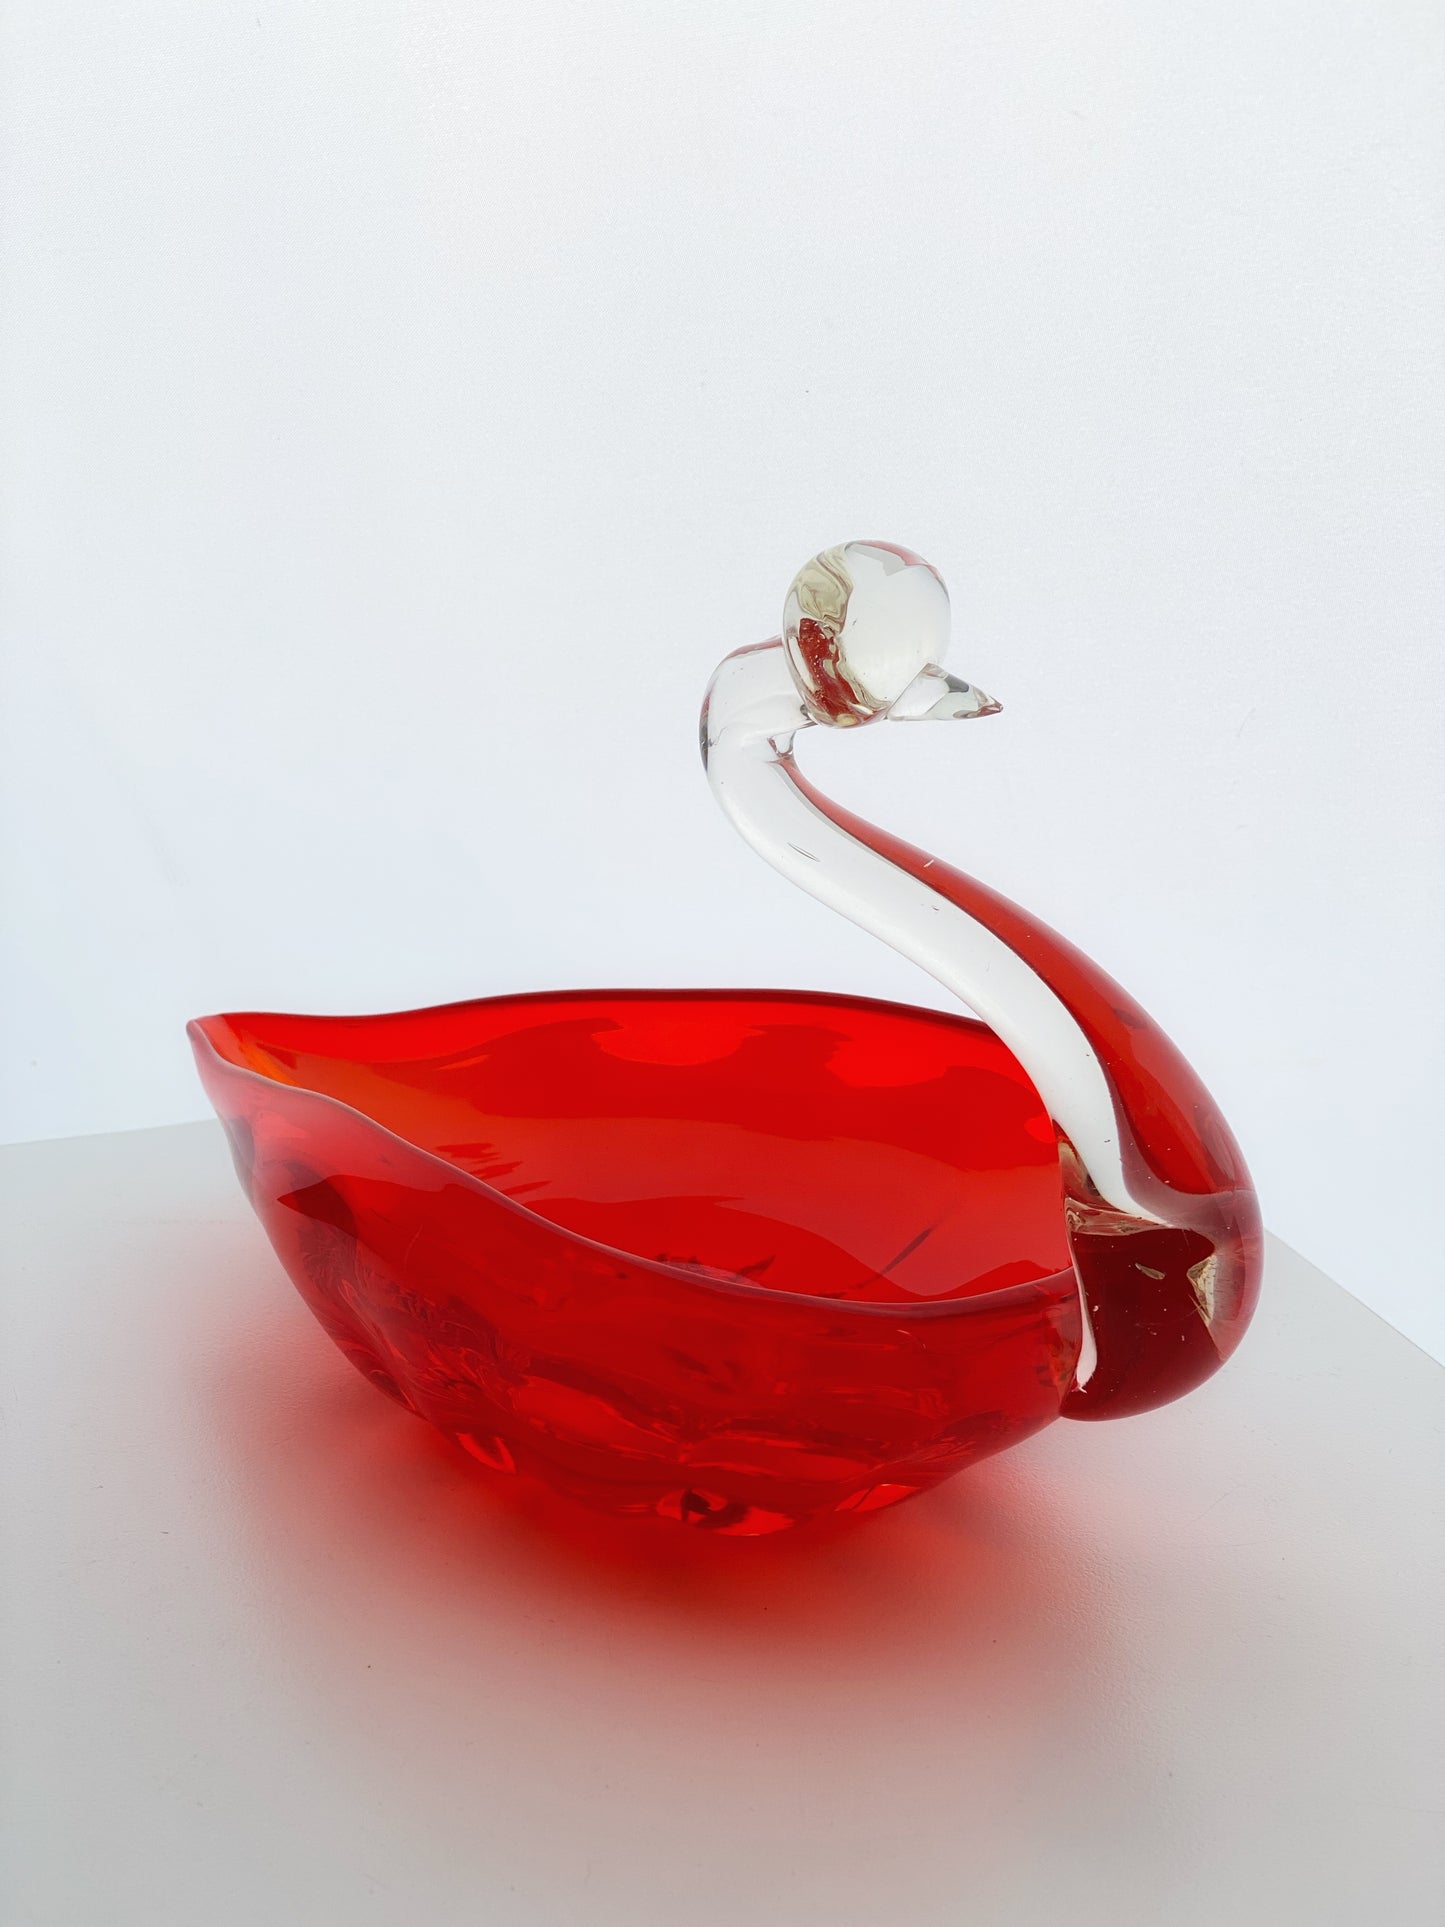 Vintage Japanese Glass Swan 1960s Red Dish / Ashtray